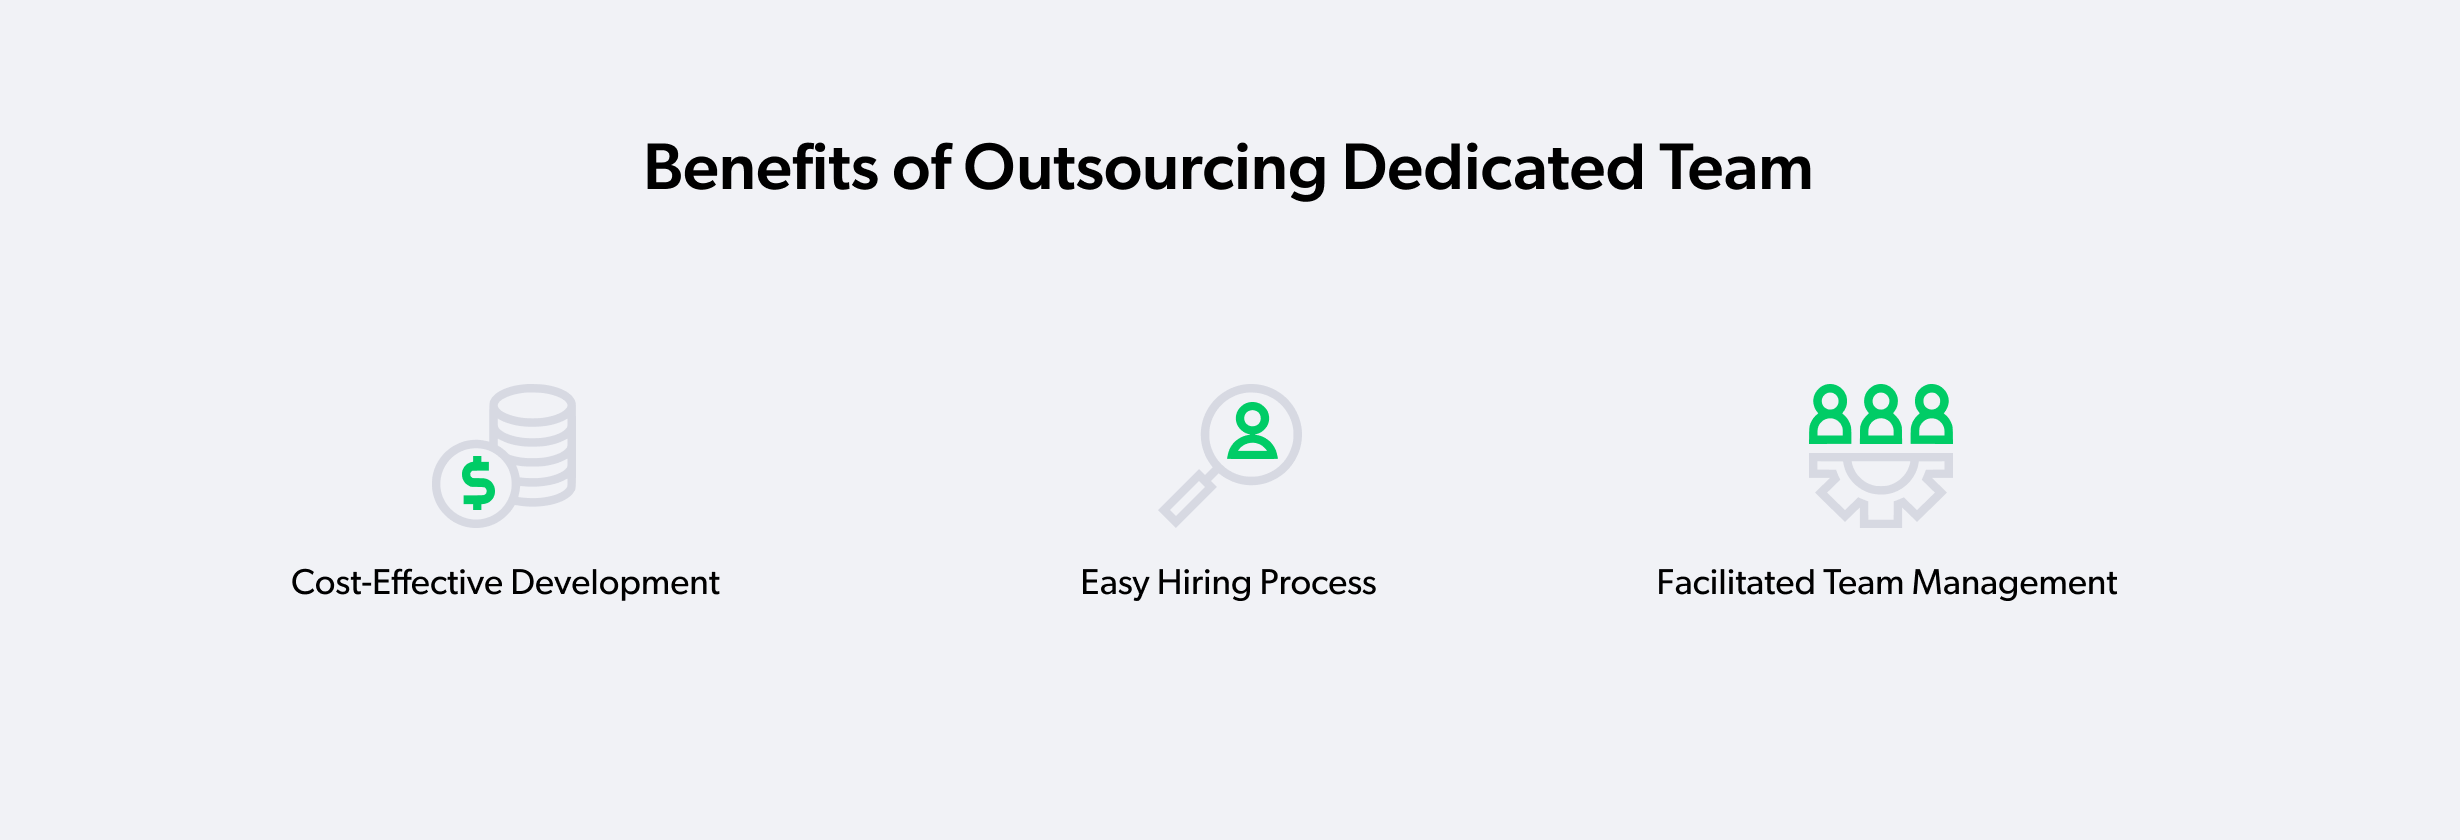 Benefits of outsourcing dedicated team